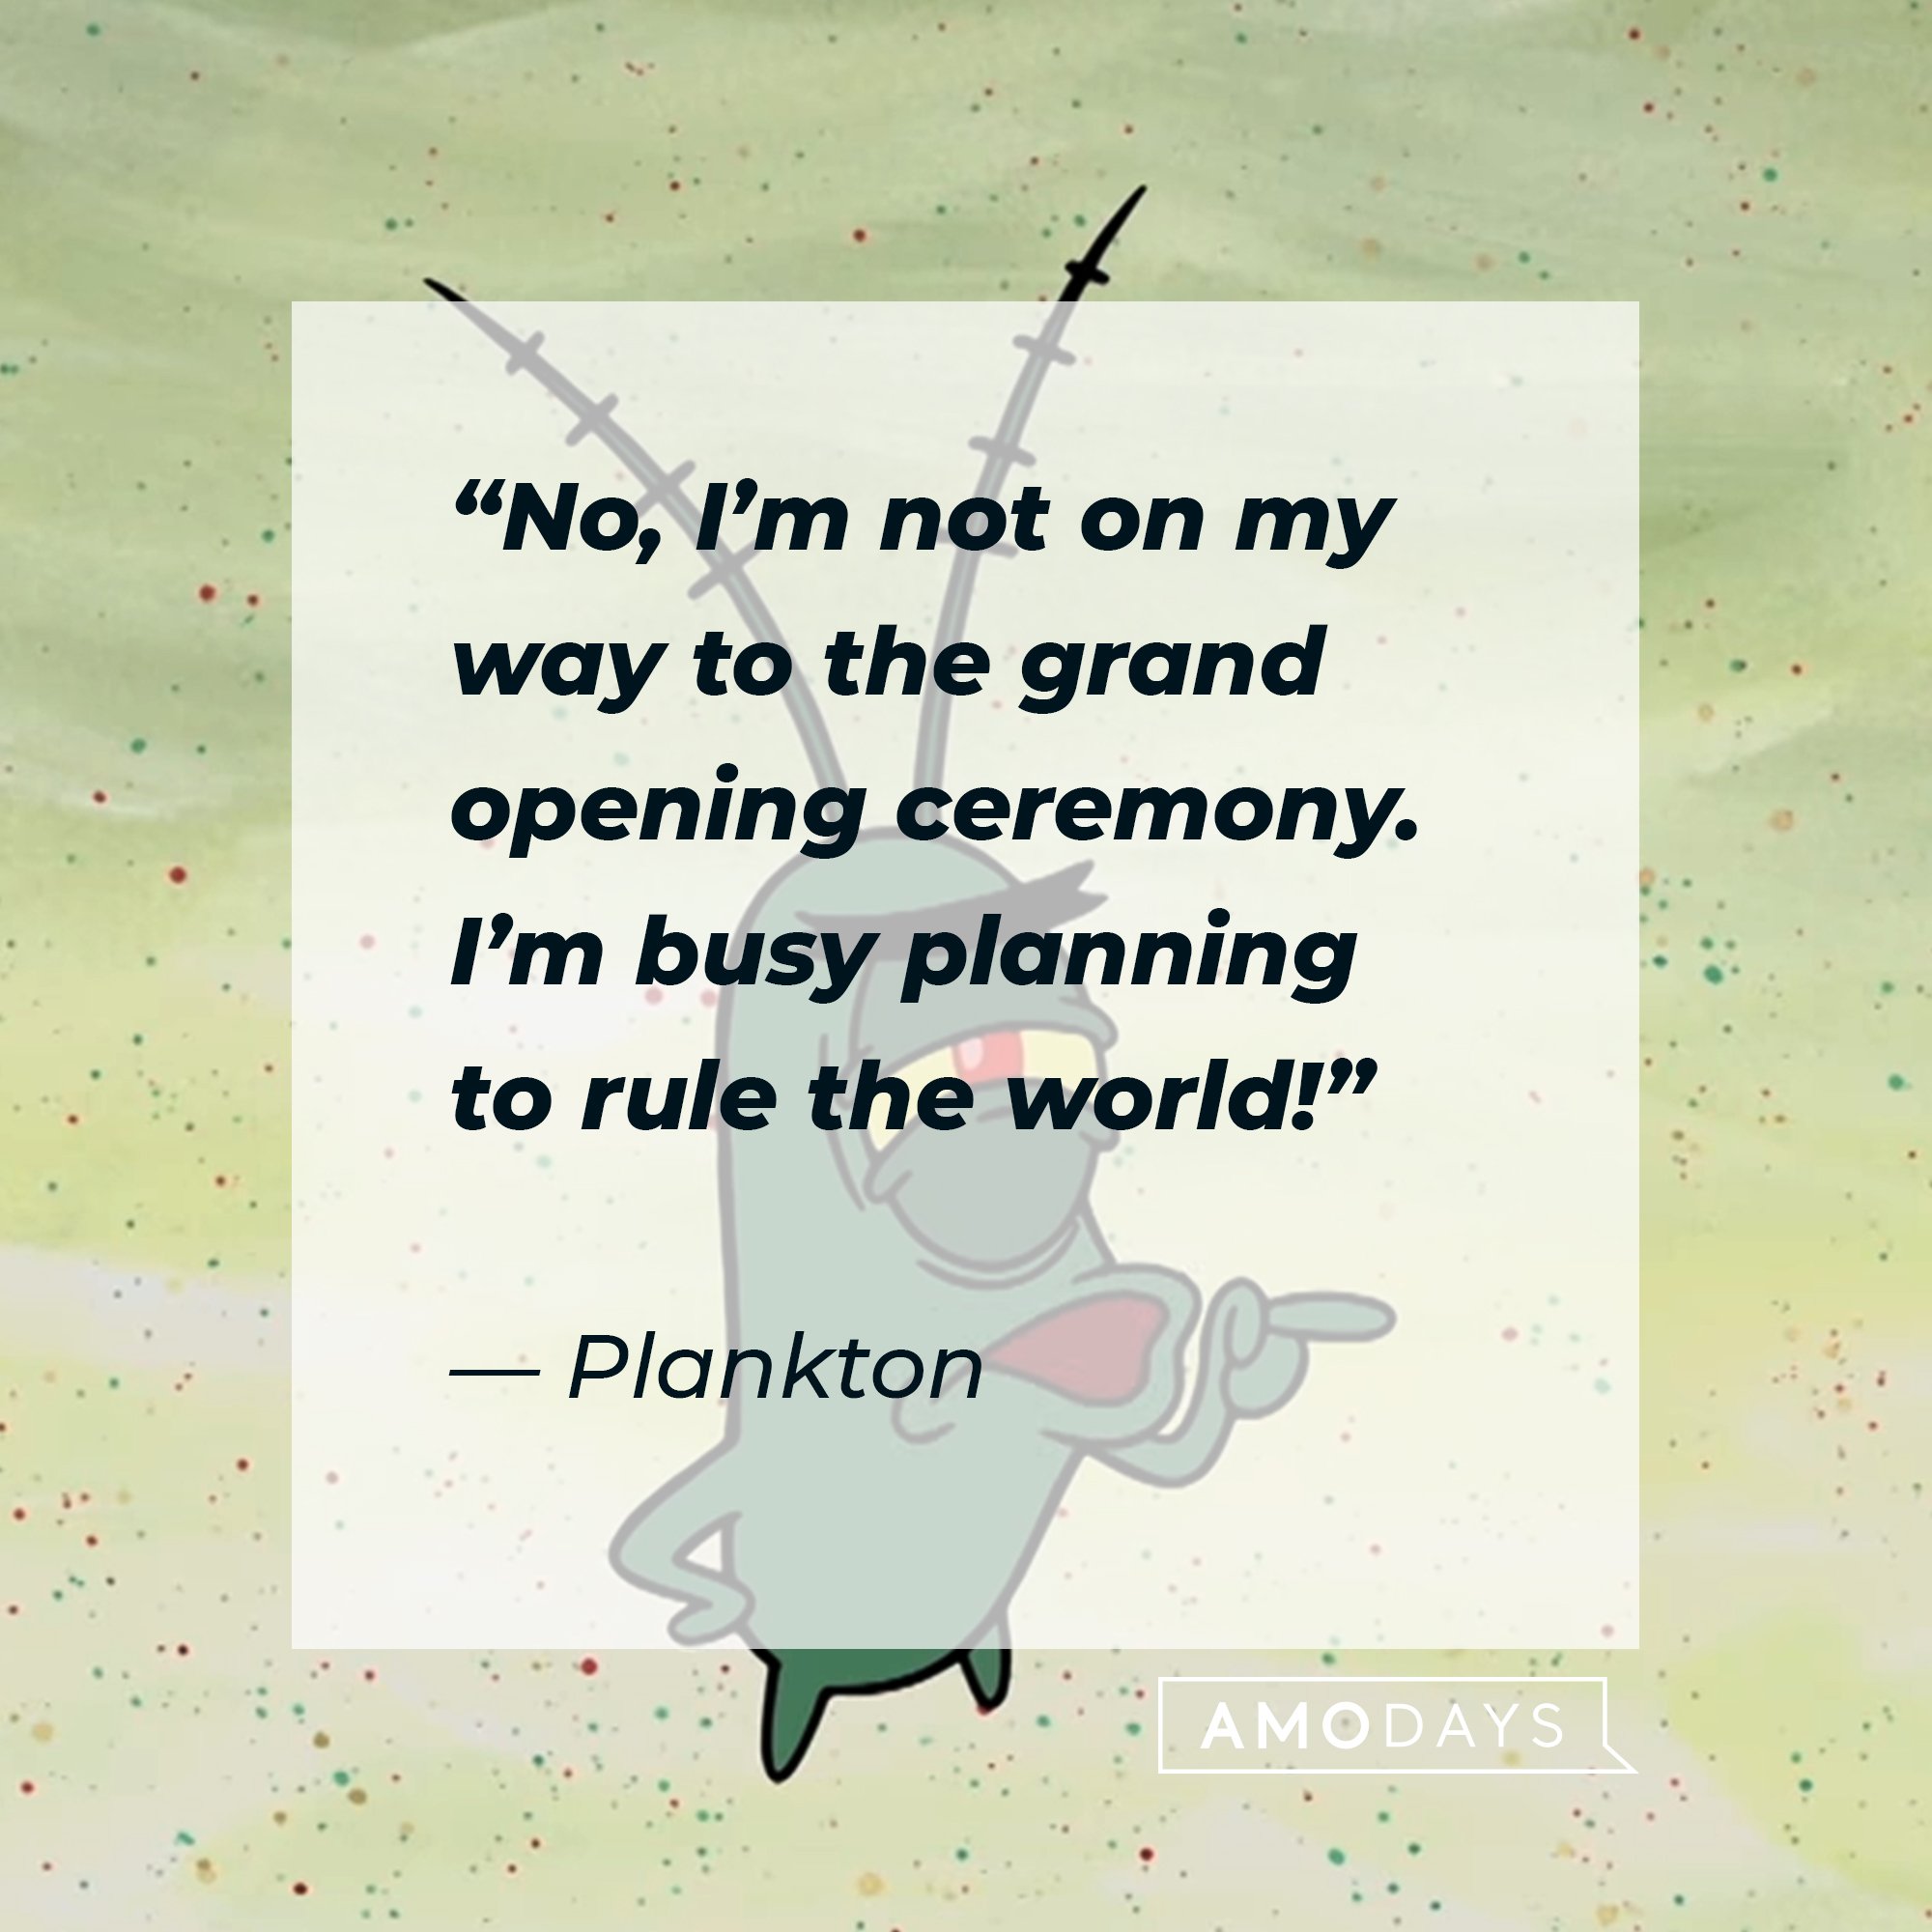 Plankton's quote: “No, I’m not on my way to the grand opening ceremony. I’m busy planning to rule the world!”  | Image: AmoDays